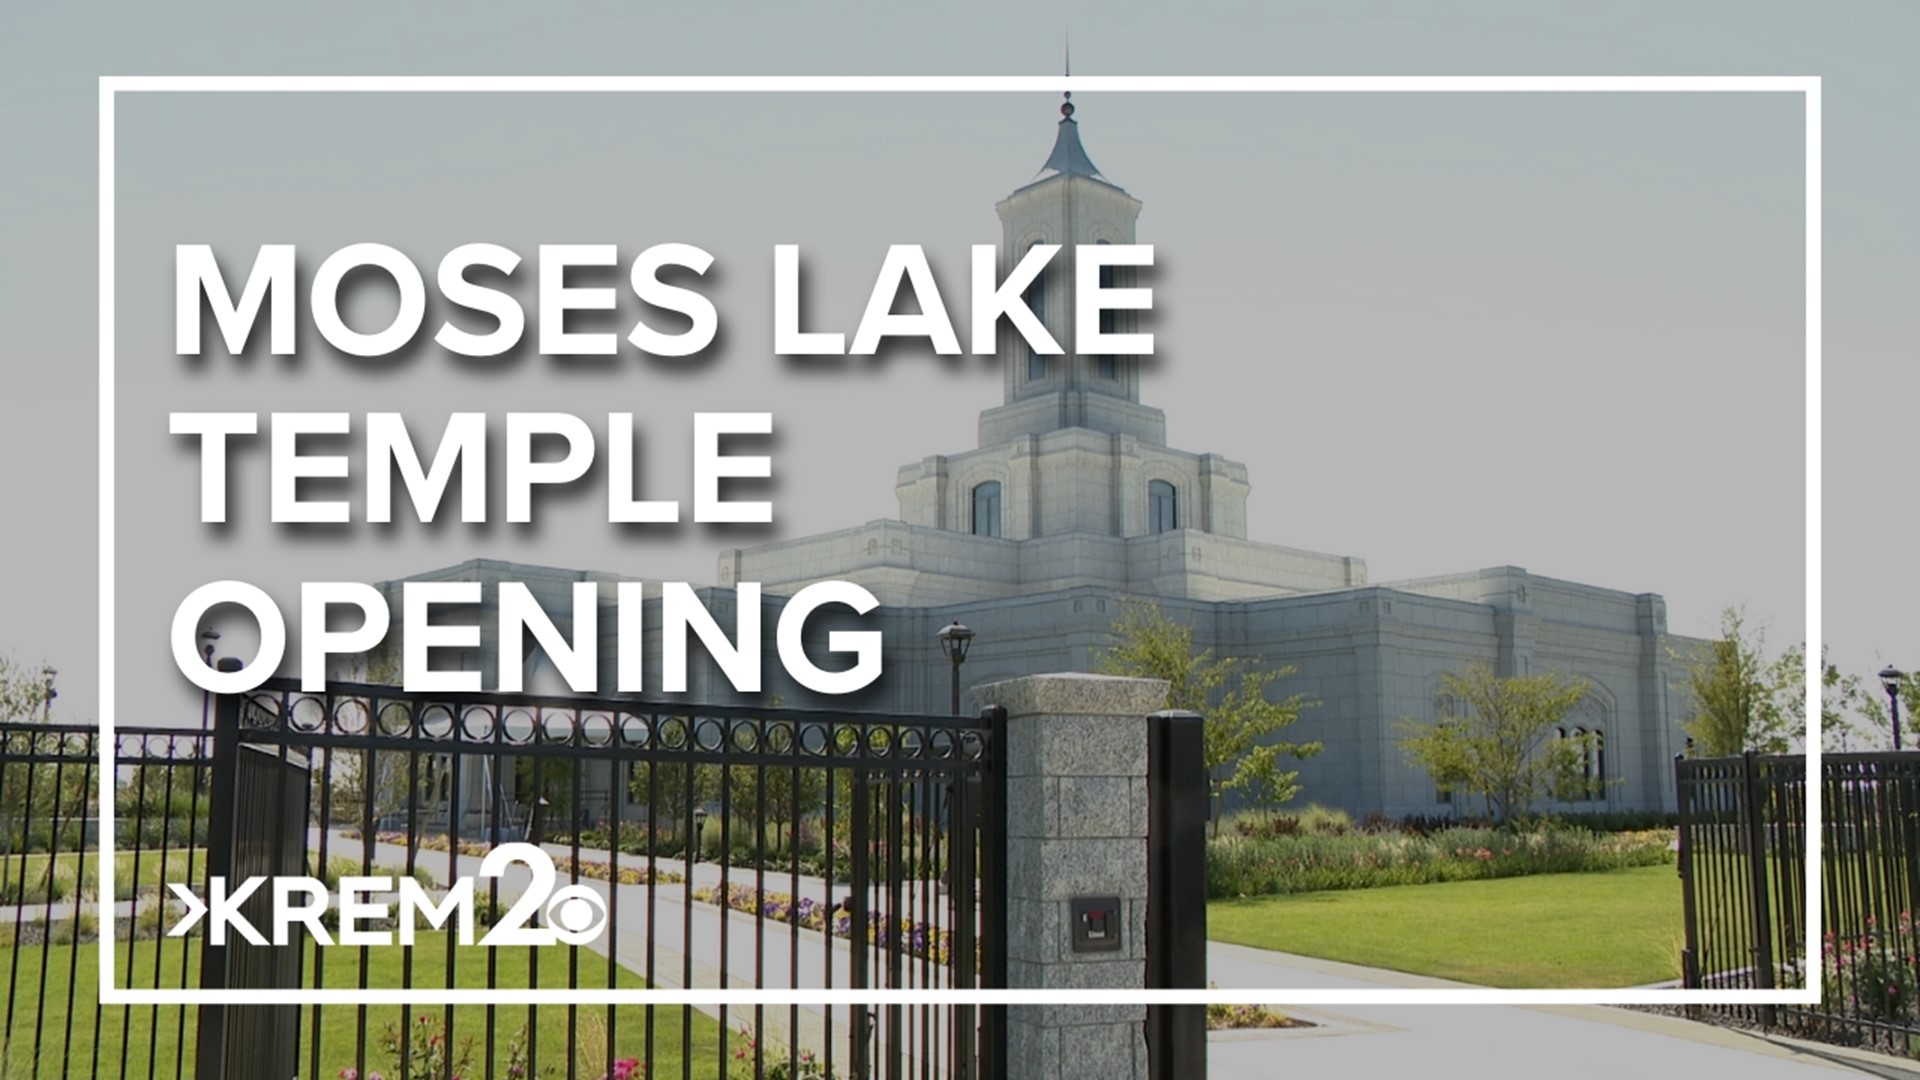 The new temple is now open in Moses Lake. The public is welcome to the open house until August 19.